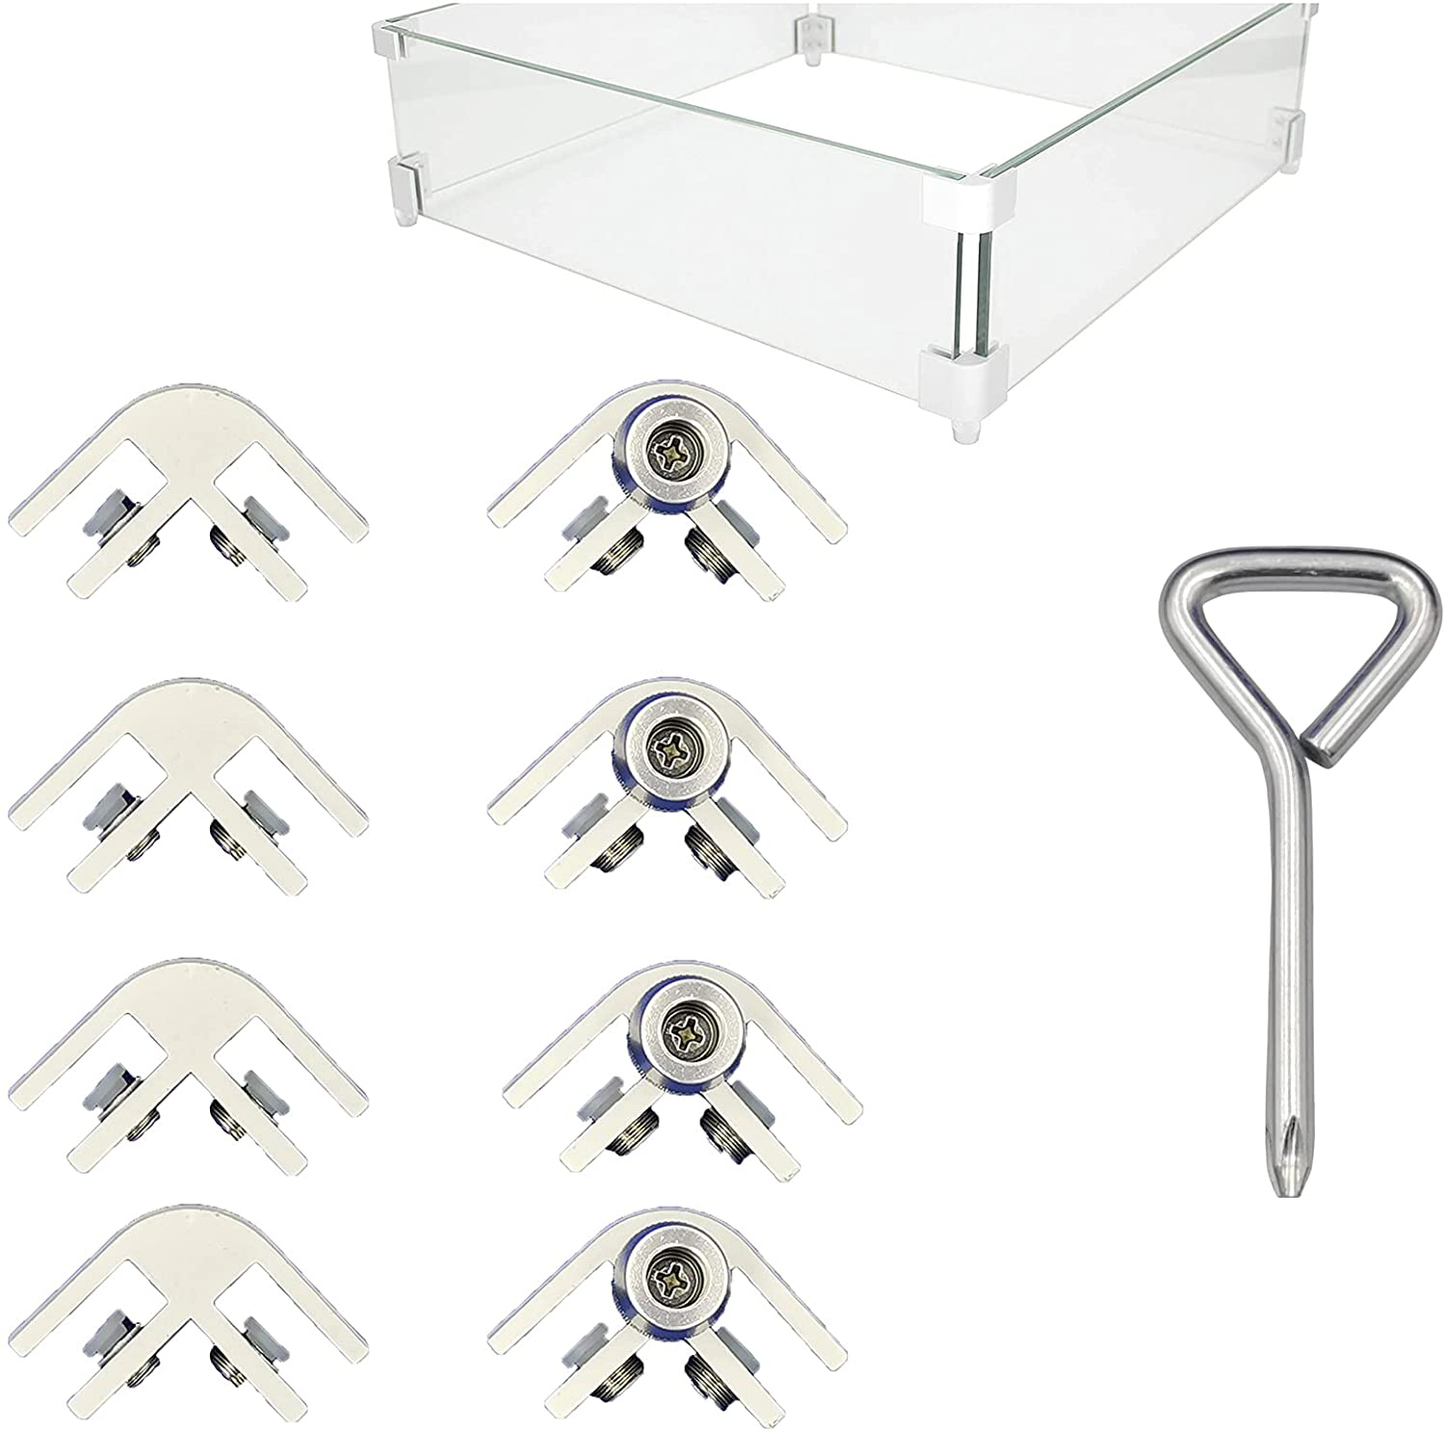 Fire Pit Wind Guard Parts Fire Pit Wind Guard Clips Replacement Clamps Thickness 5/16 Inch, Set of 8 Corner, Four Non-Slip Bases.Suitable for Square Fire Pit Wind Guard